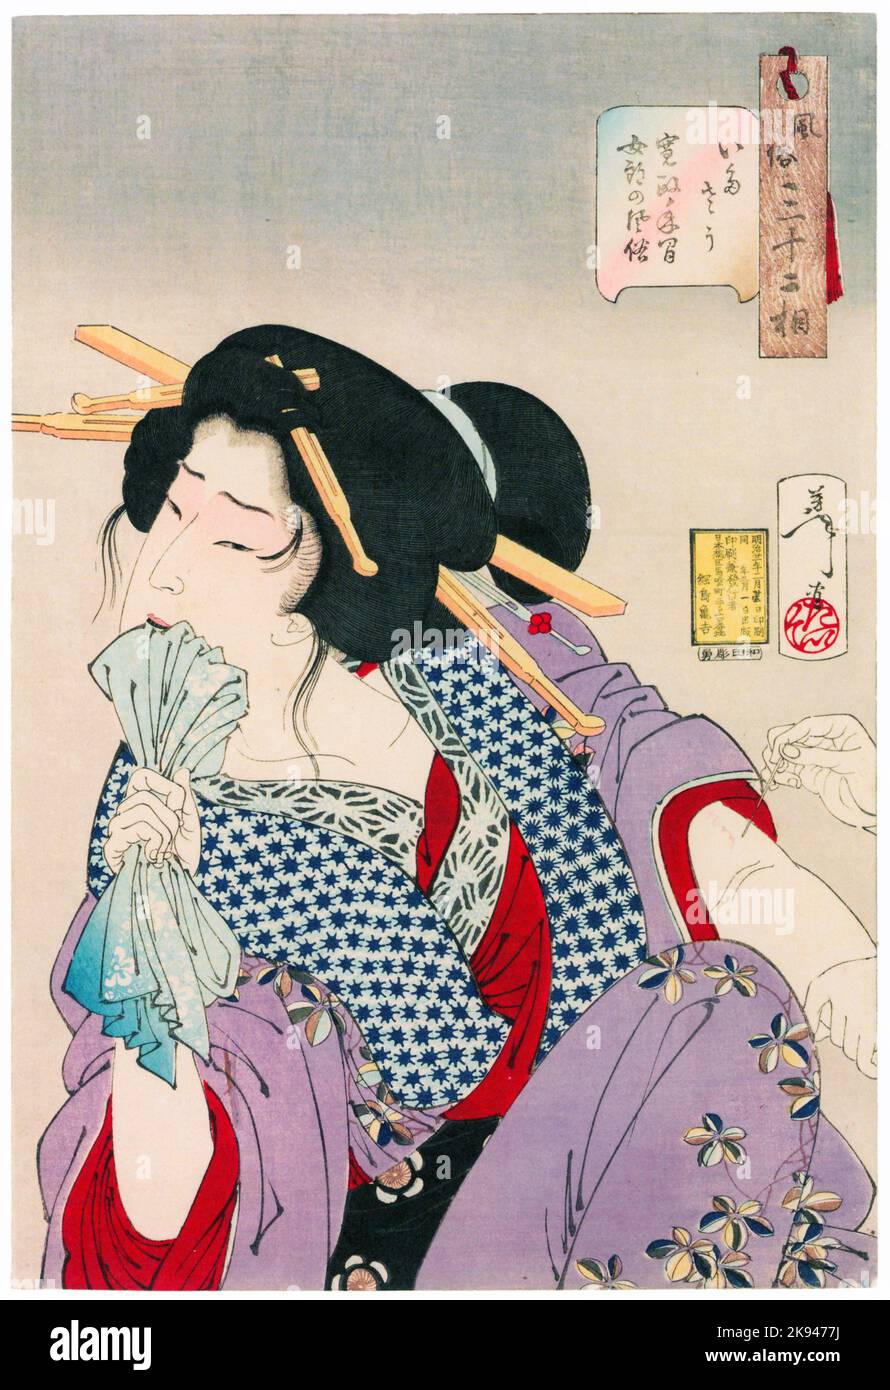 Tsukioka Yoshitoshi – Looks Painful’, Mannerisms of a Courtesan from the Kansei Period from Thirty-two Aspects of Women Stock Photo